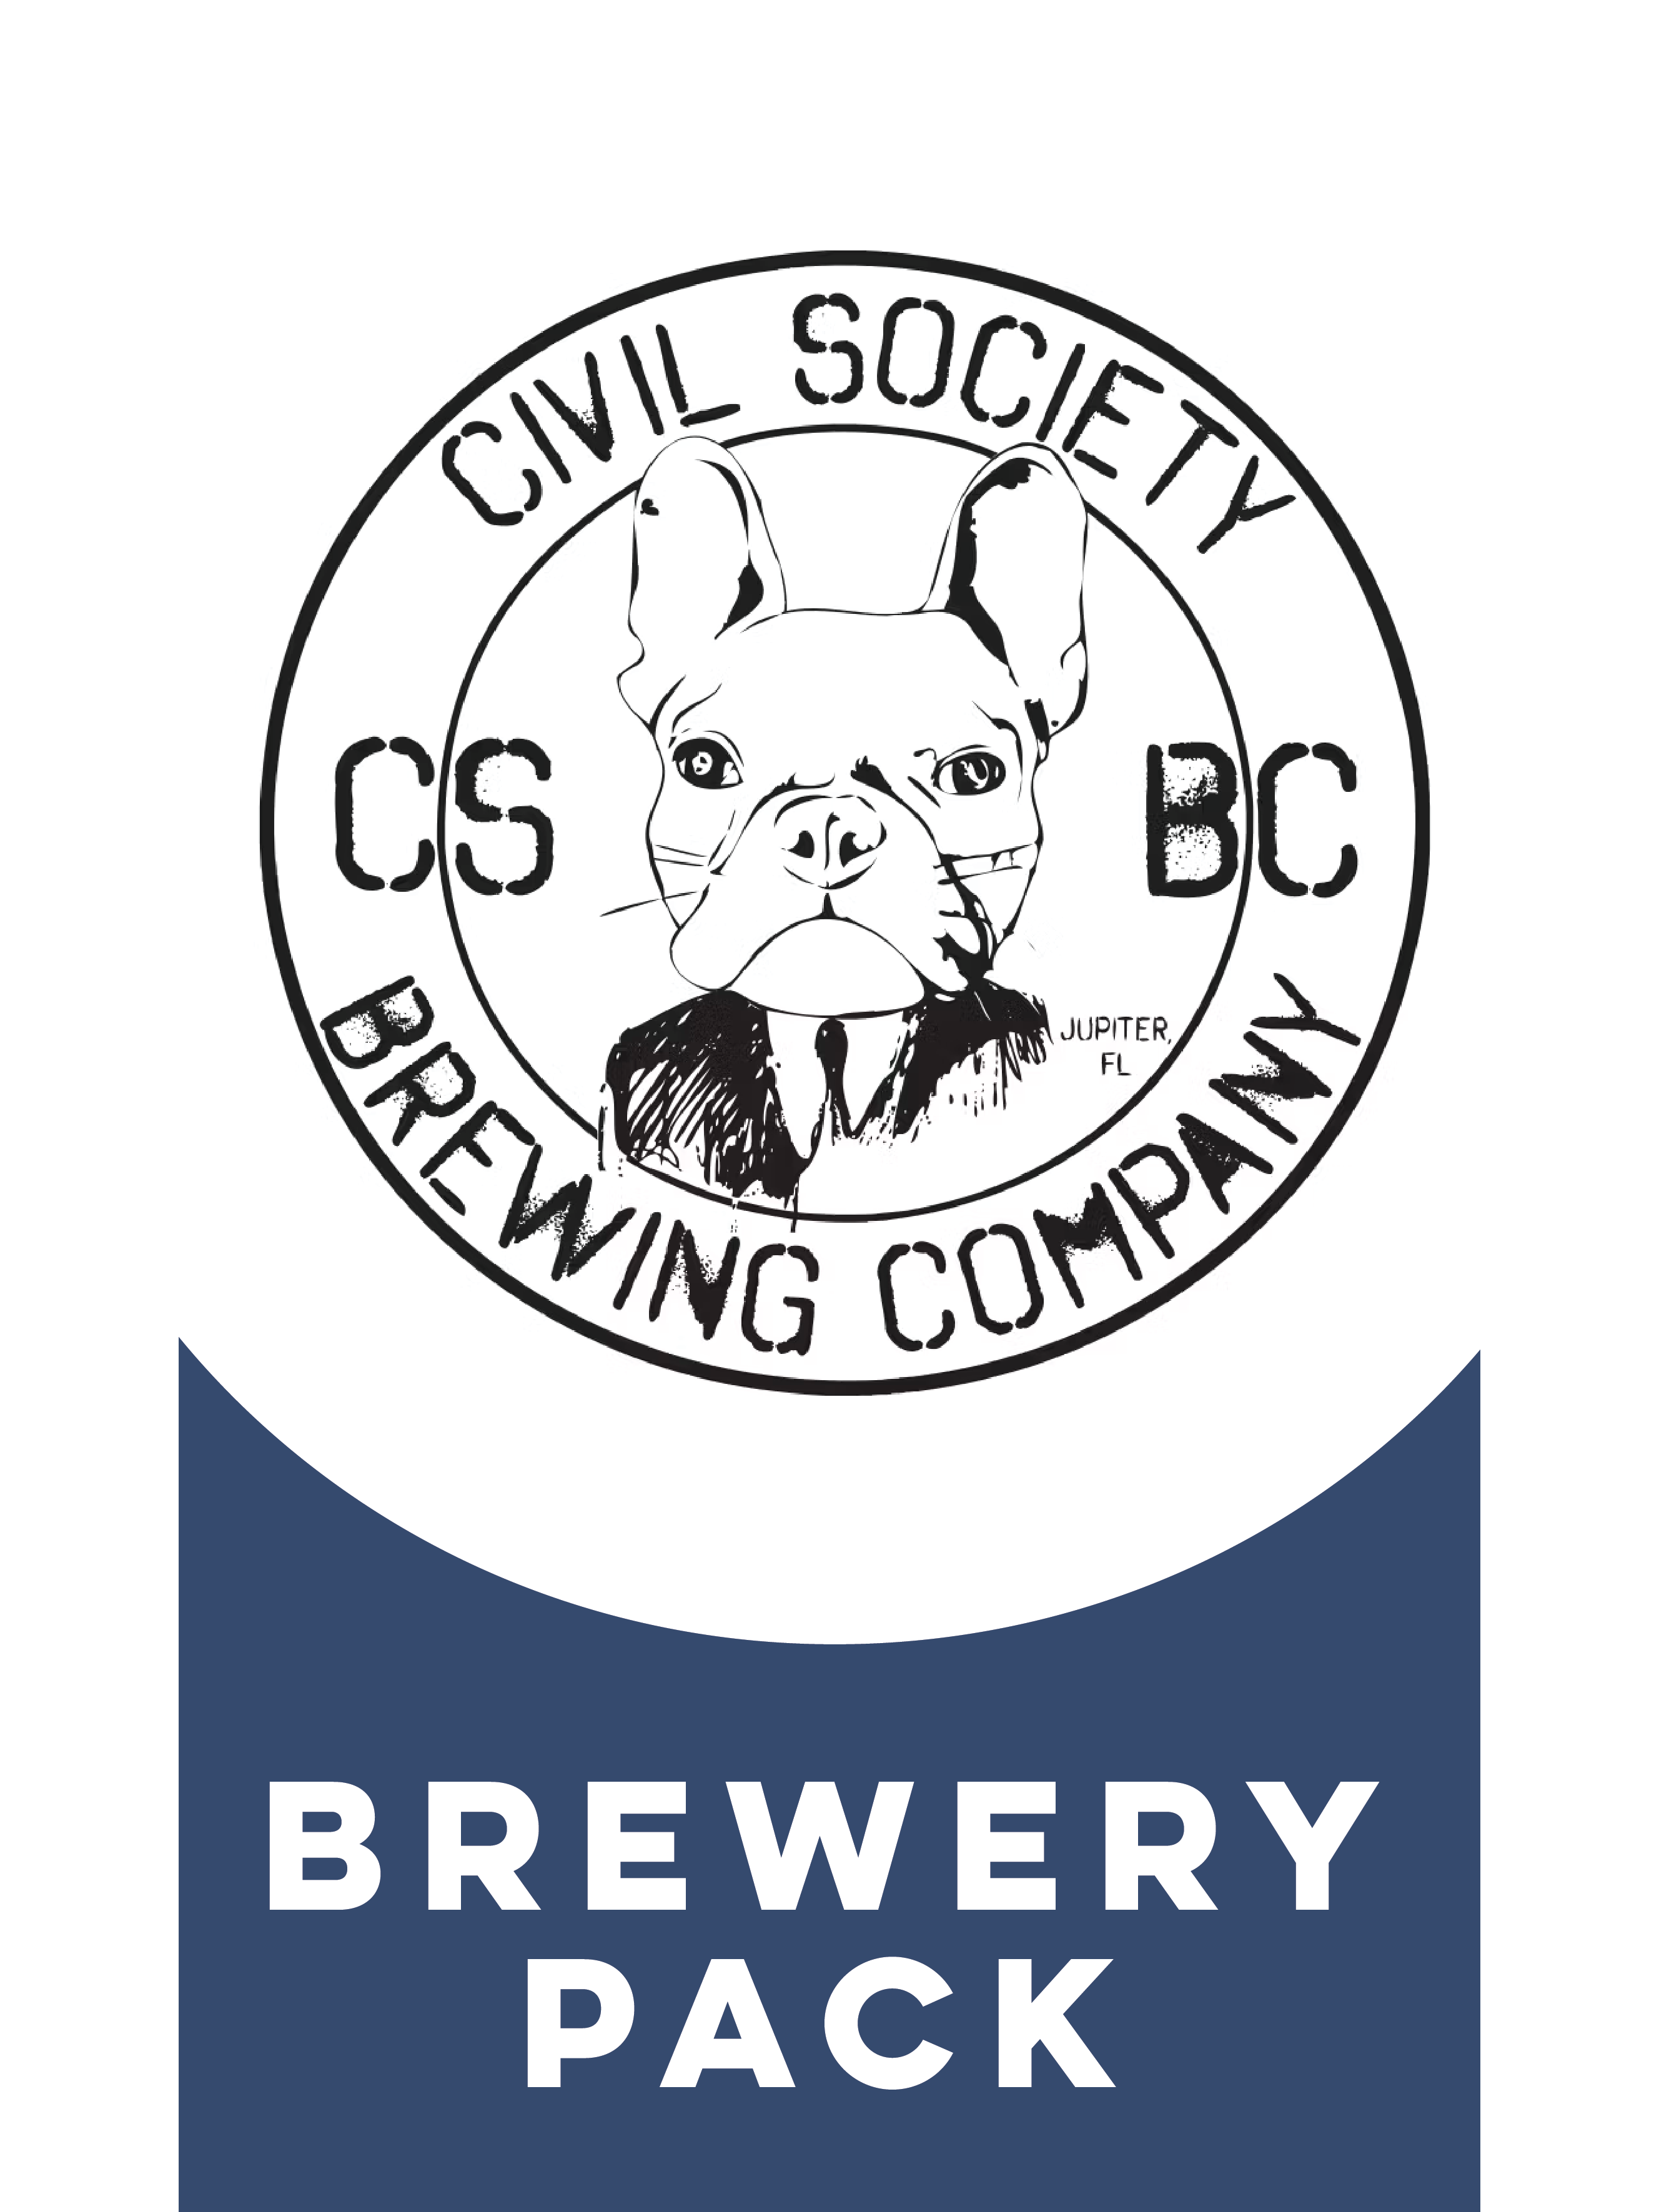 -Civil Society- Civil Society Brewery Pack-Packs & Cases- Only @ Beer Republic - The best online beer store for American & Canadian craft beer - Buy beer online from the USA and Canada - Bier online kopen - Amerikaans bier kopen - Craft beer store - Craft beer kopen - Amerikanisch bier kaufen - Bier online kaufen - Acheter biere online - IPA - Stout - Porter - New England IPA - Hazy IPA - Imperial Stout - Barrel Aged - Barrel Aged Imperial Stout - Brown - Dark beer - Blond - Blonde - Pilsner - Lager - Wheat